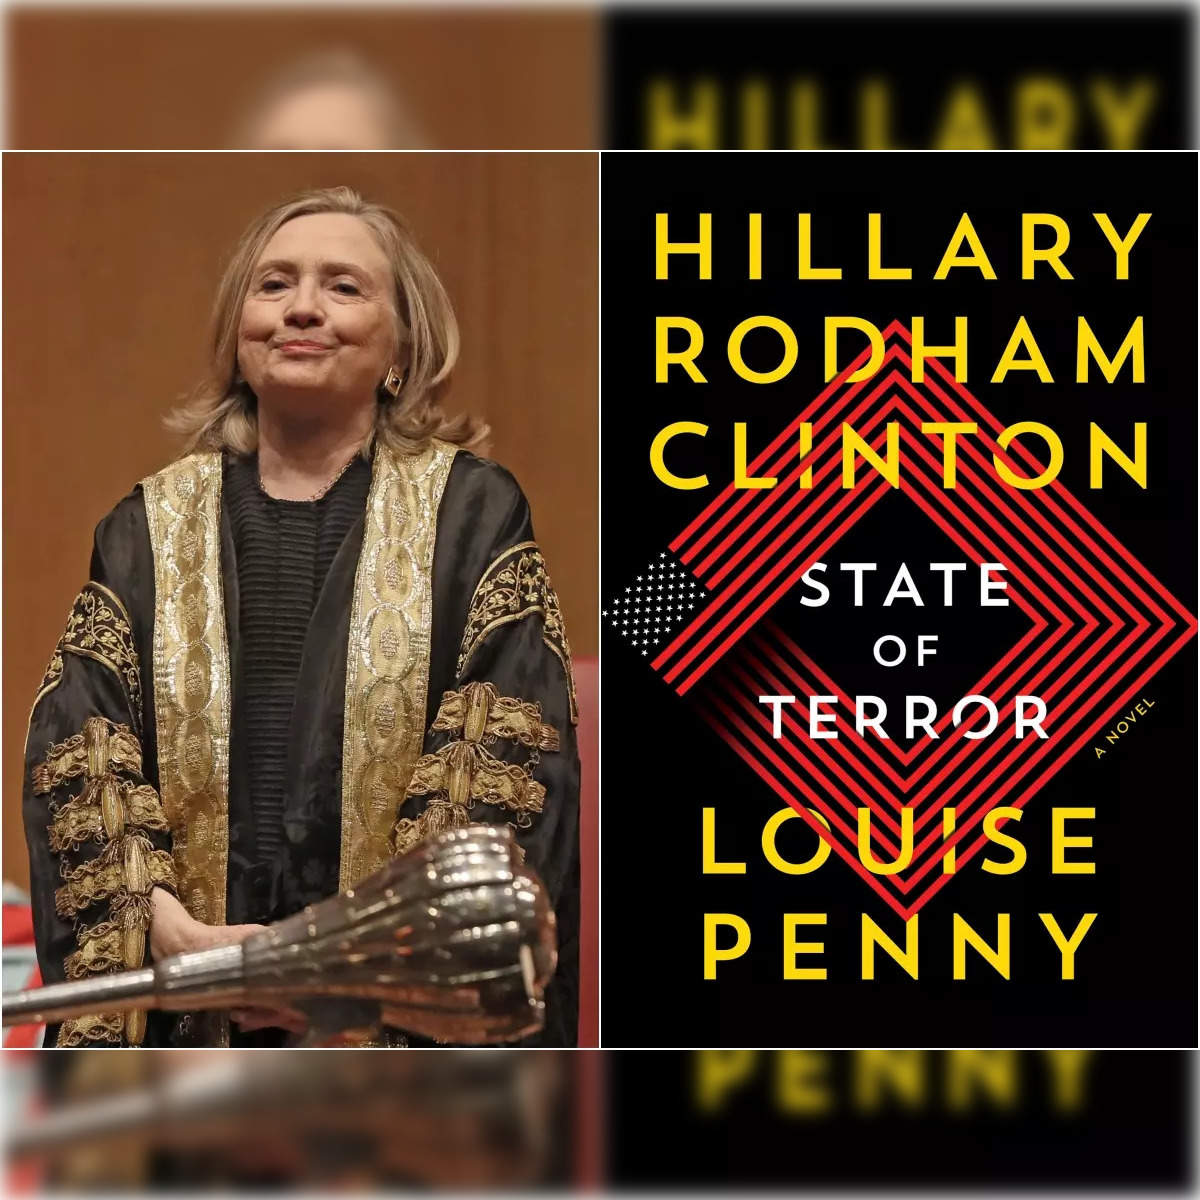 State of Terror  Book by Louise Penny, Hillary Rodham Clinton